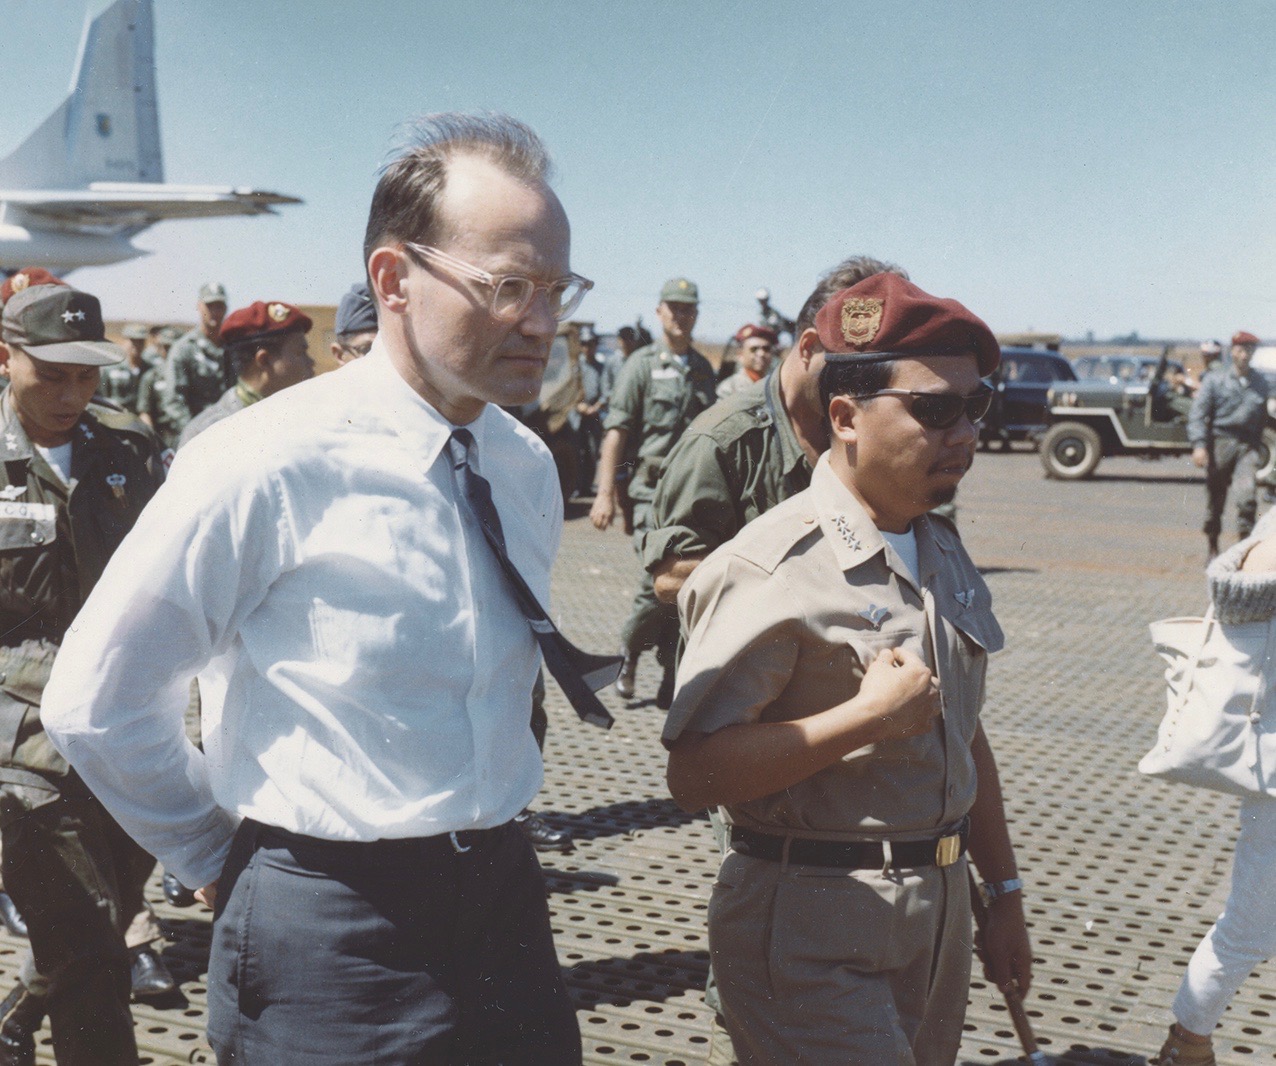 Presidential adviser McGeorge Bundy visits an Army base near Pleiku struck by the Viet Cong in February 1965. He recommended U.S. retaliation. (National Archives)